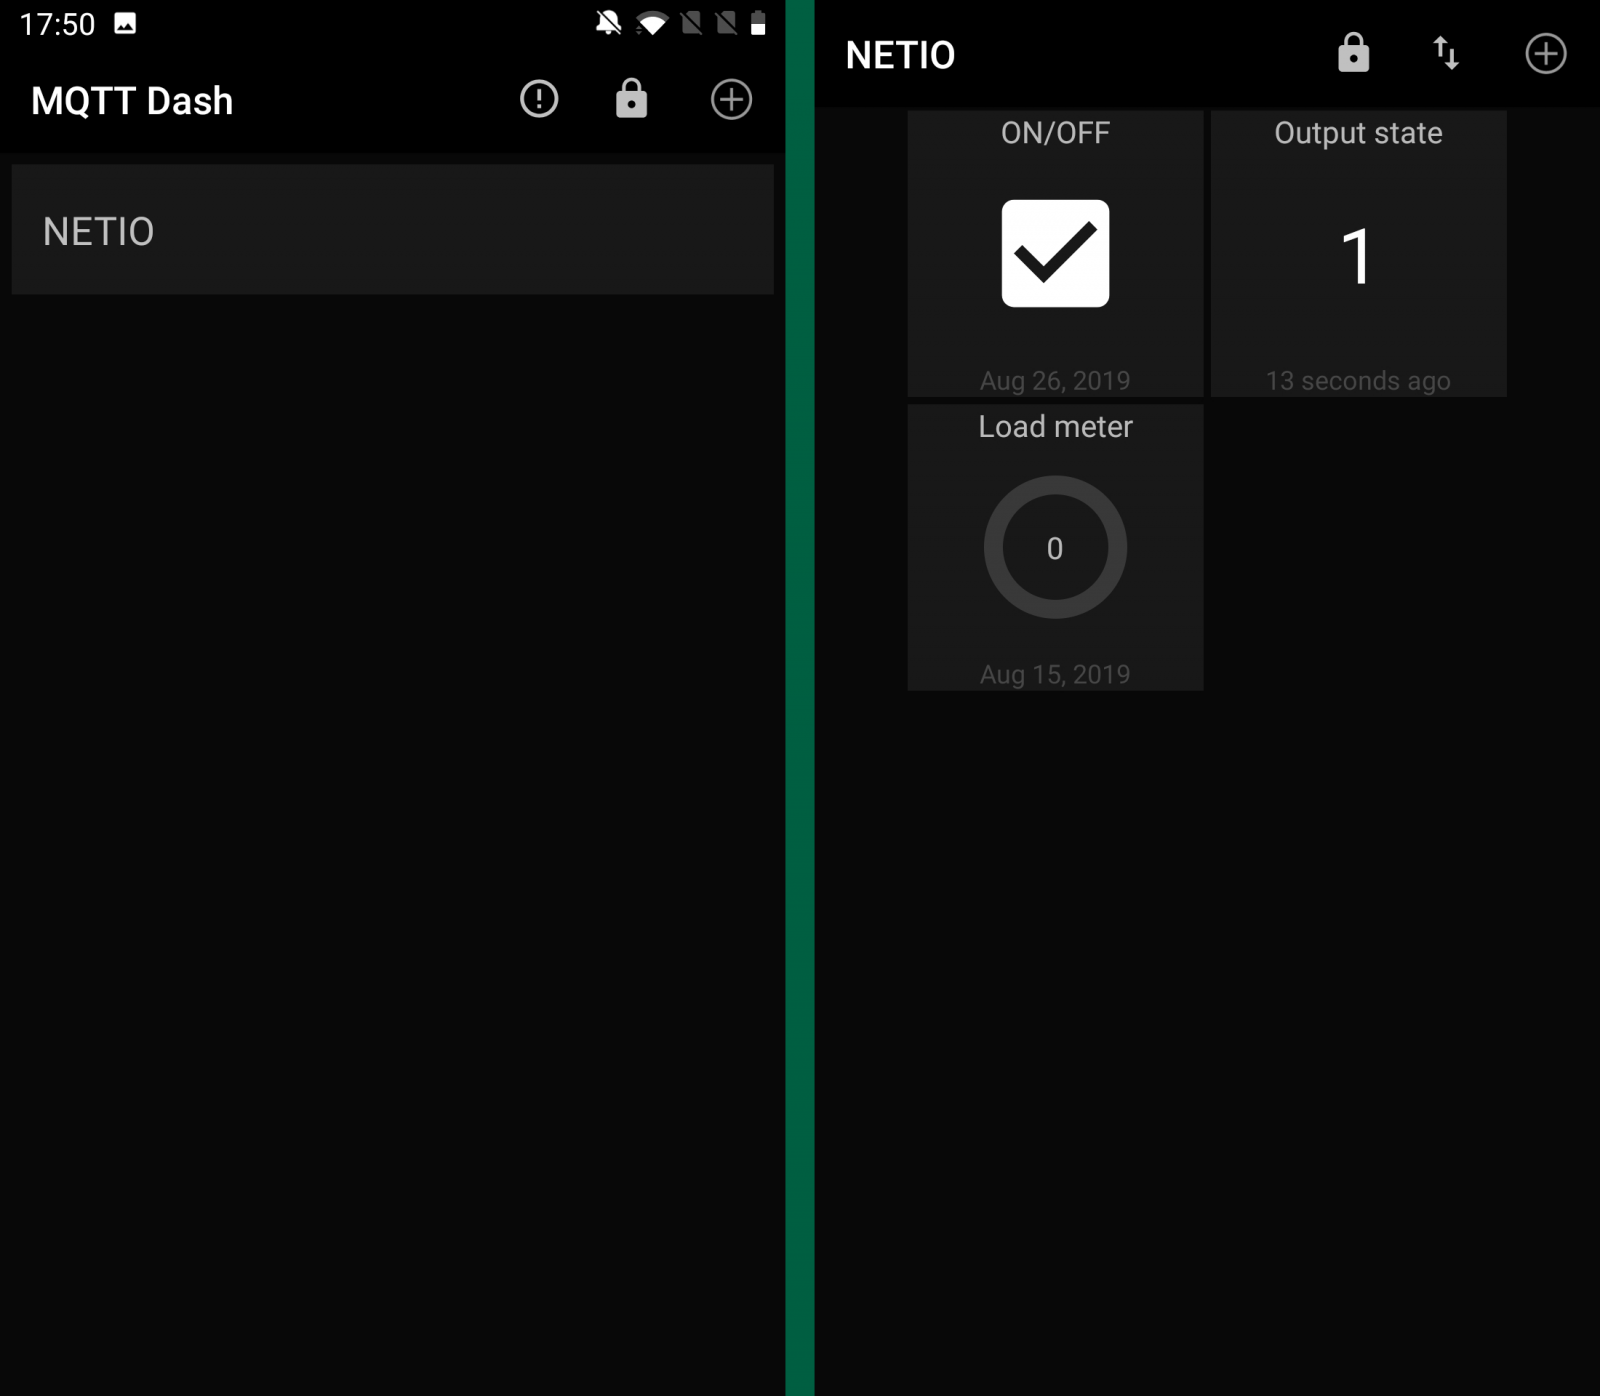 Screenshots of MQTT Dash, android app for controlling NETIO networked smart power sockets